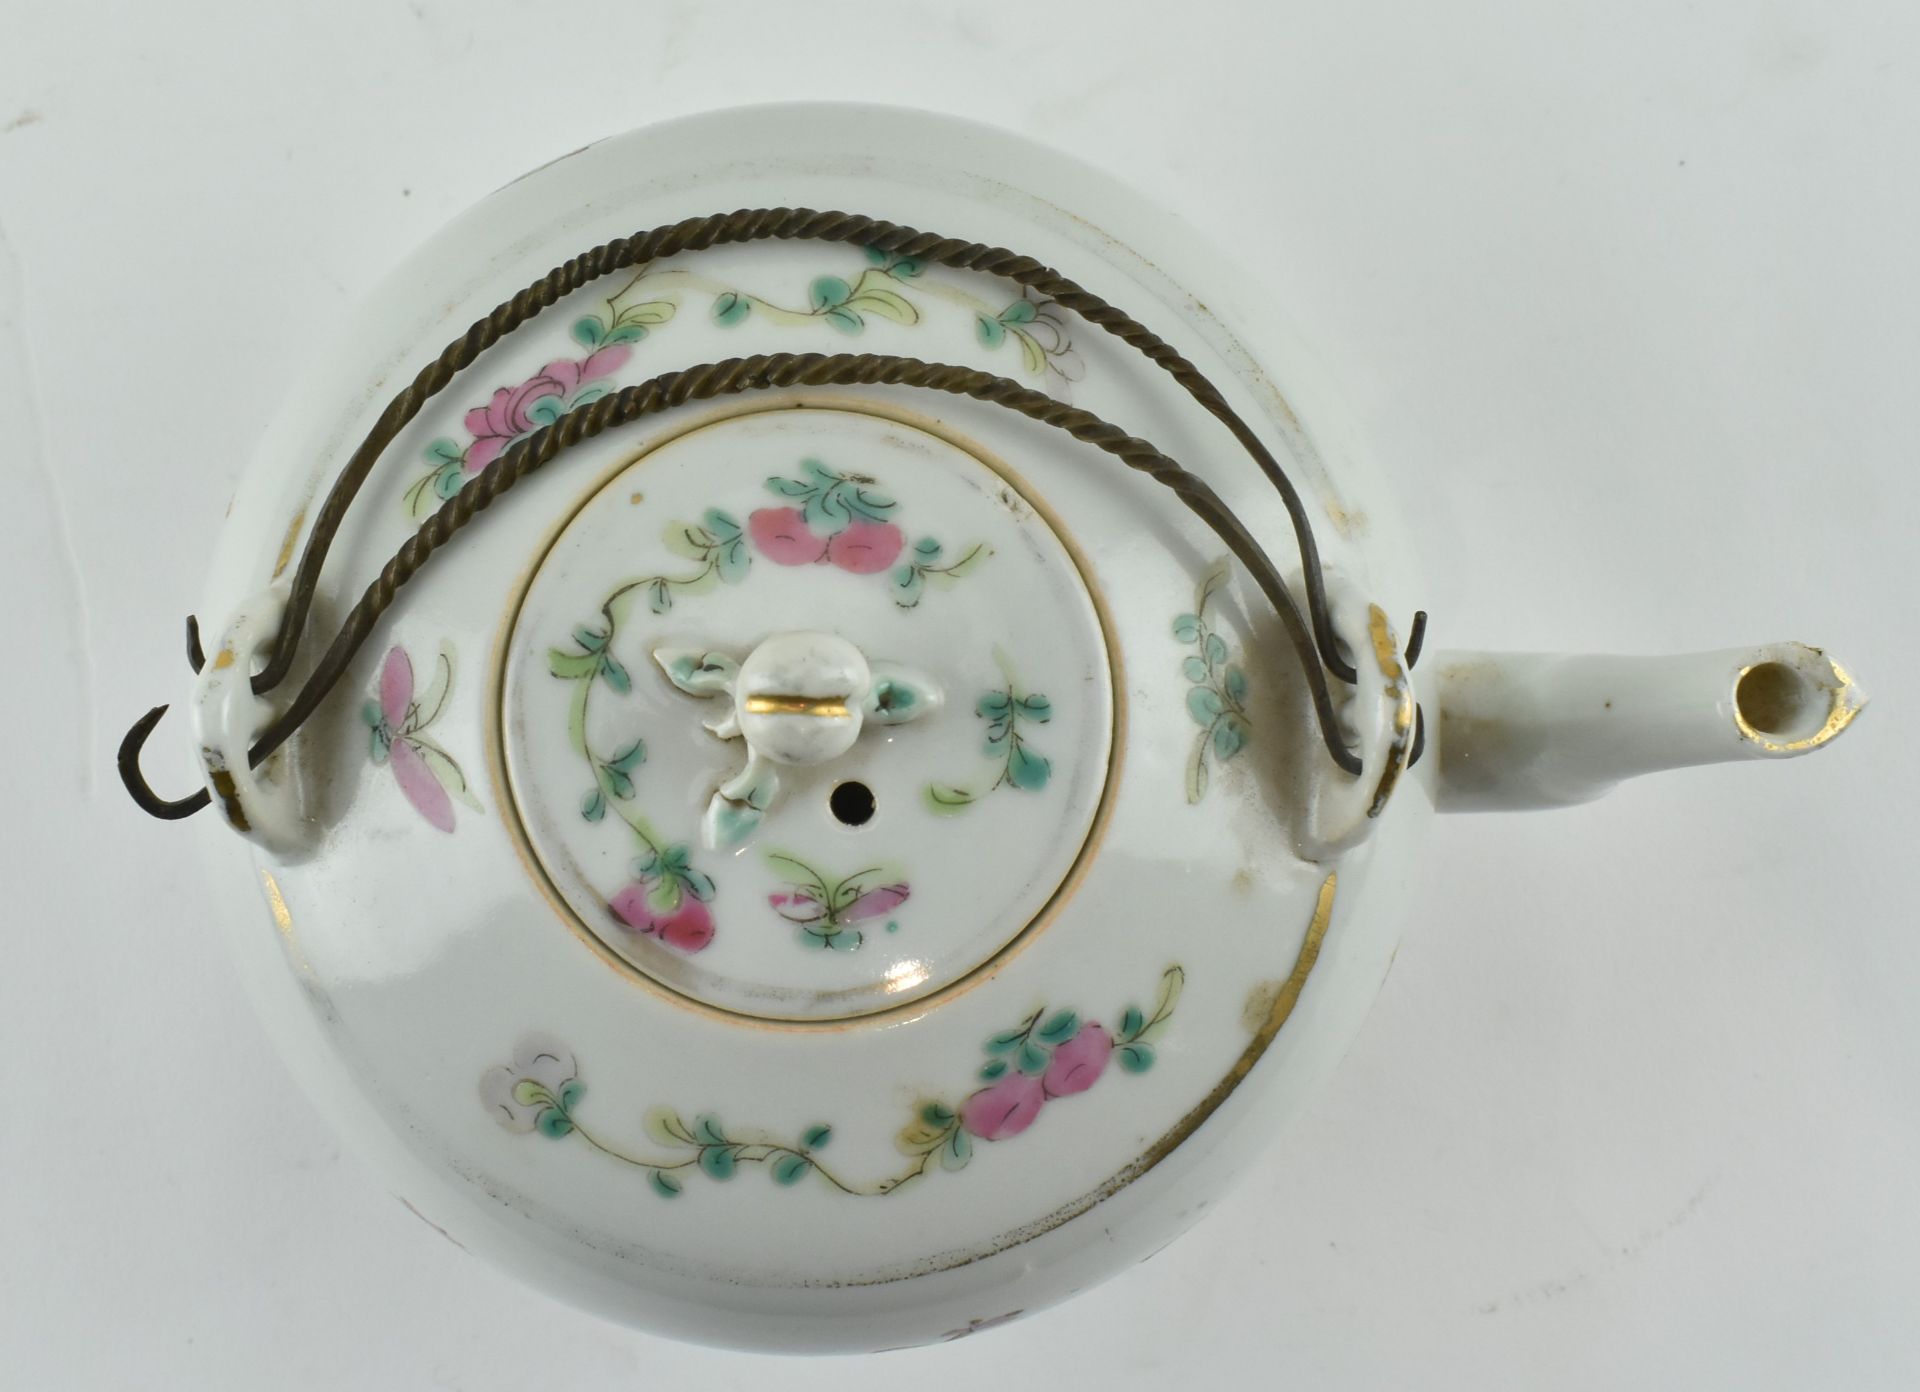 LATE QING DYNASTY FAMILE ROSE TEAPOT 晚清 粉彩戏婴茶壶 - Image 3 of 7